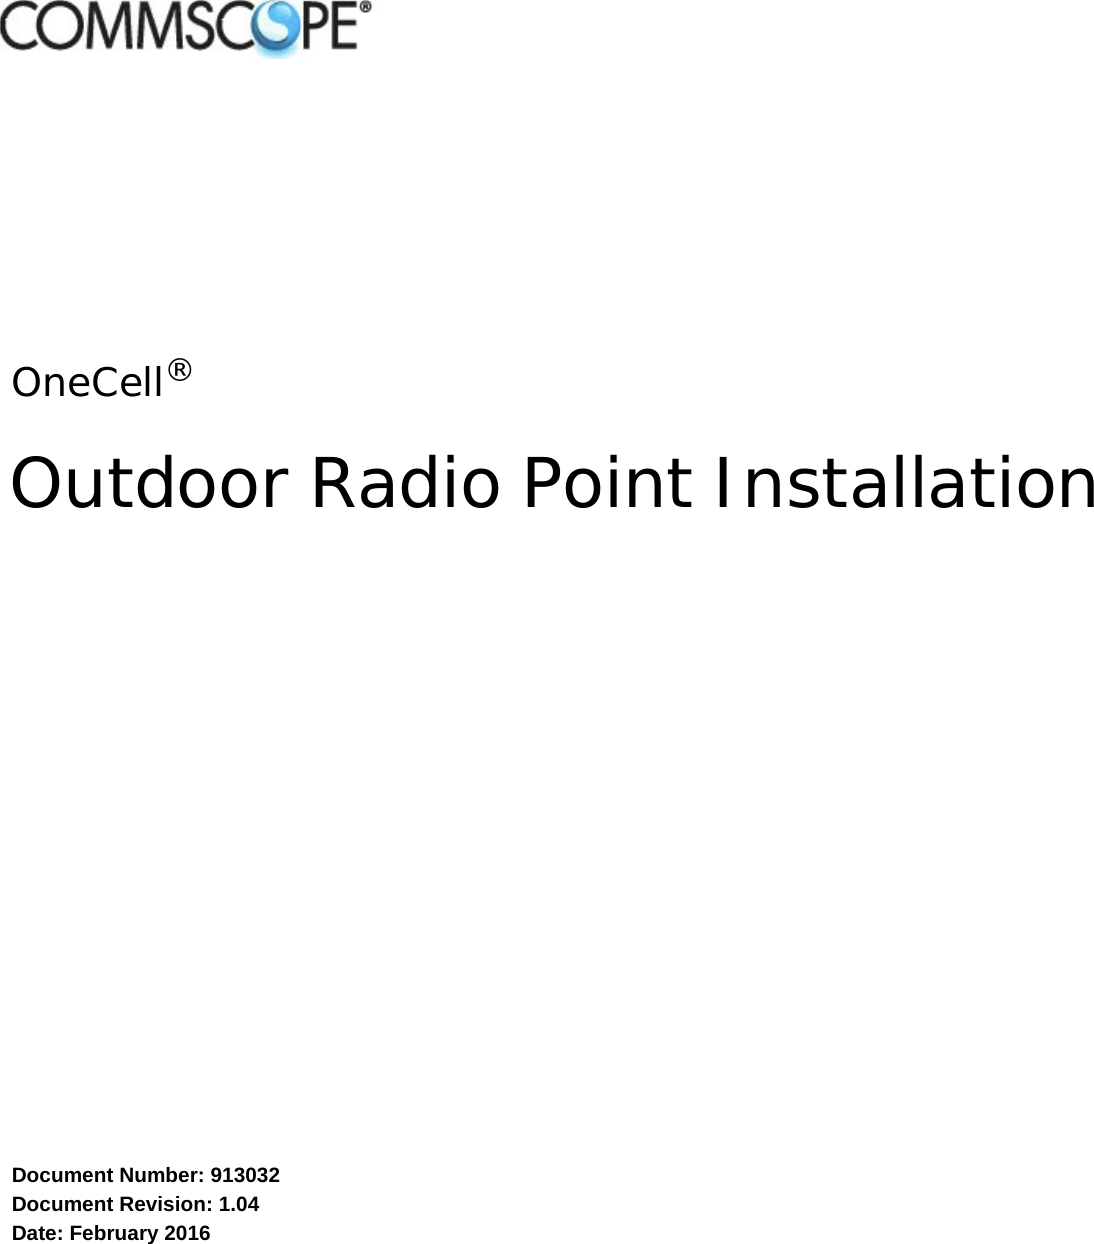 Outdoor Radio Point InstallationDocument Number: 913032 Document Revision: 1.04Date: February 2016OneCell®